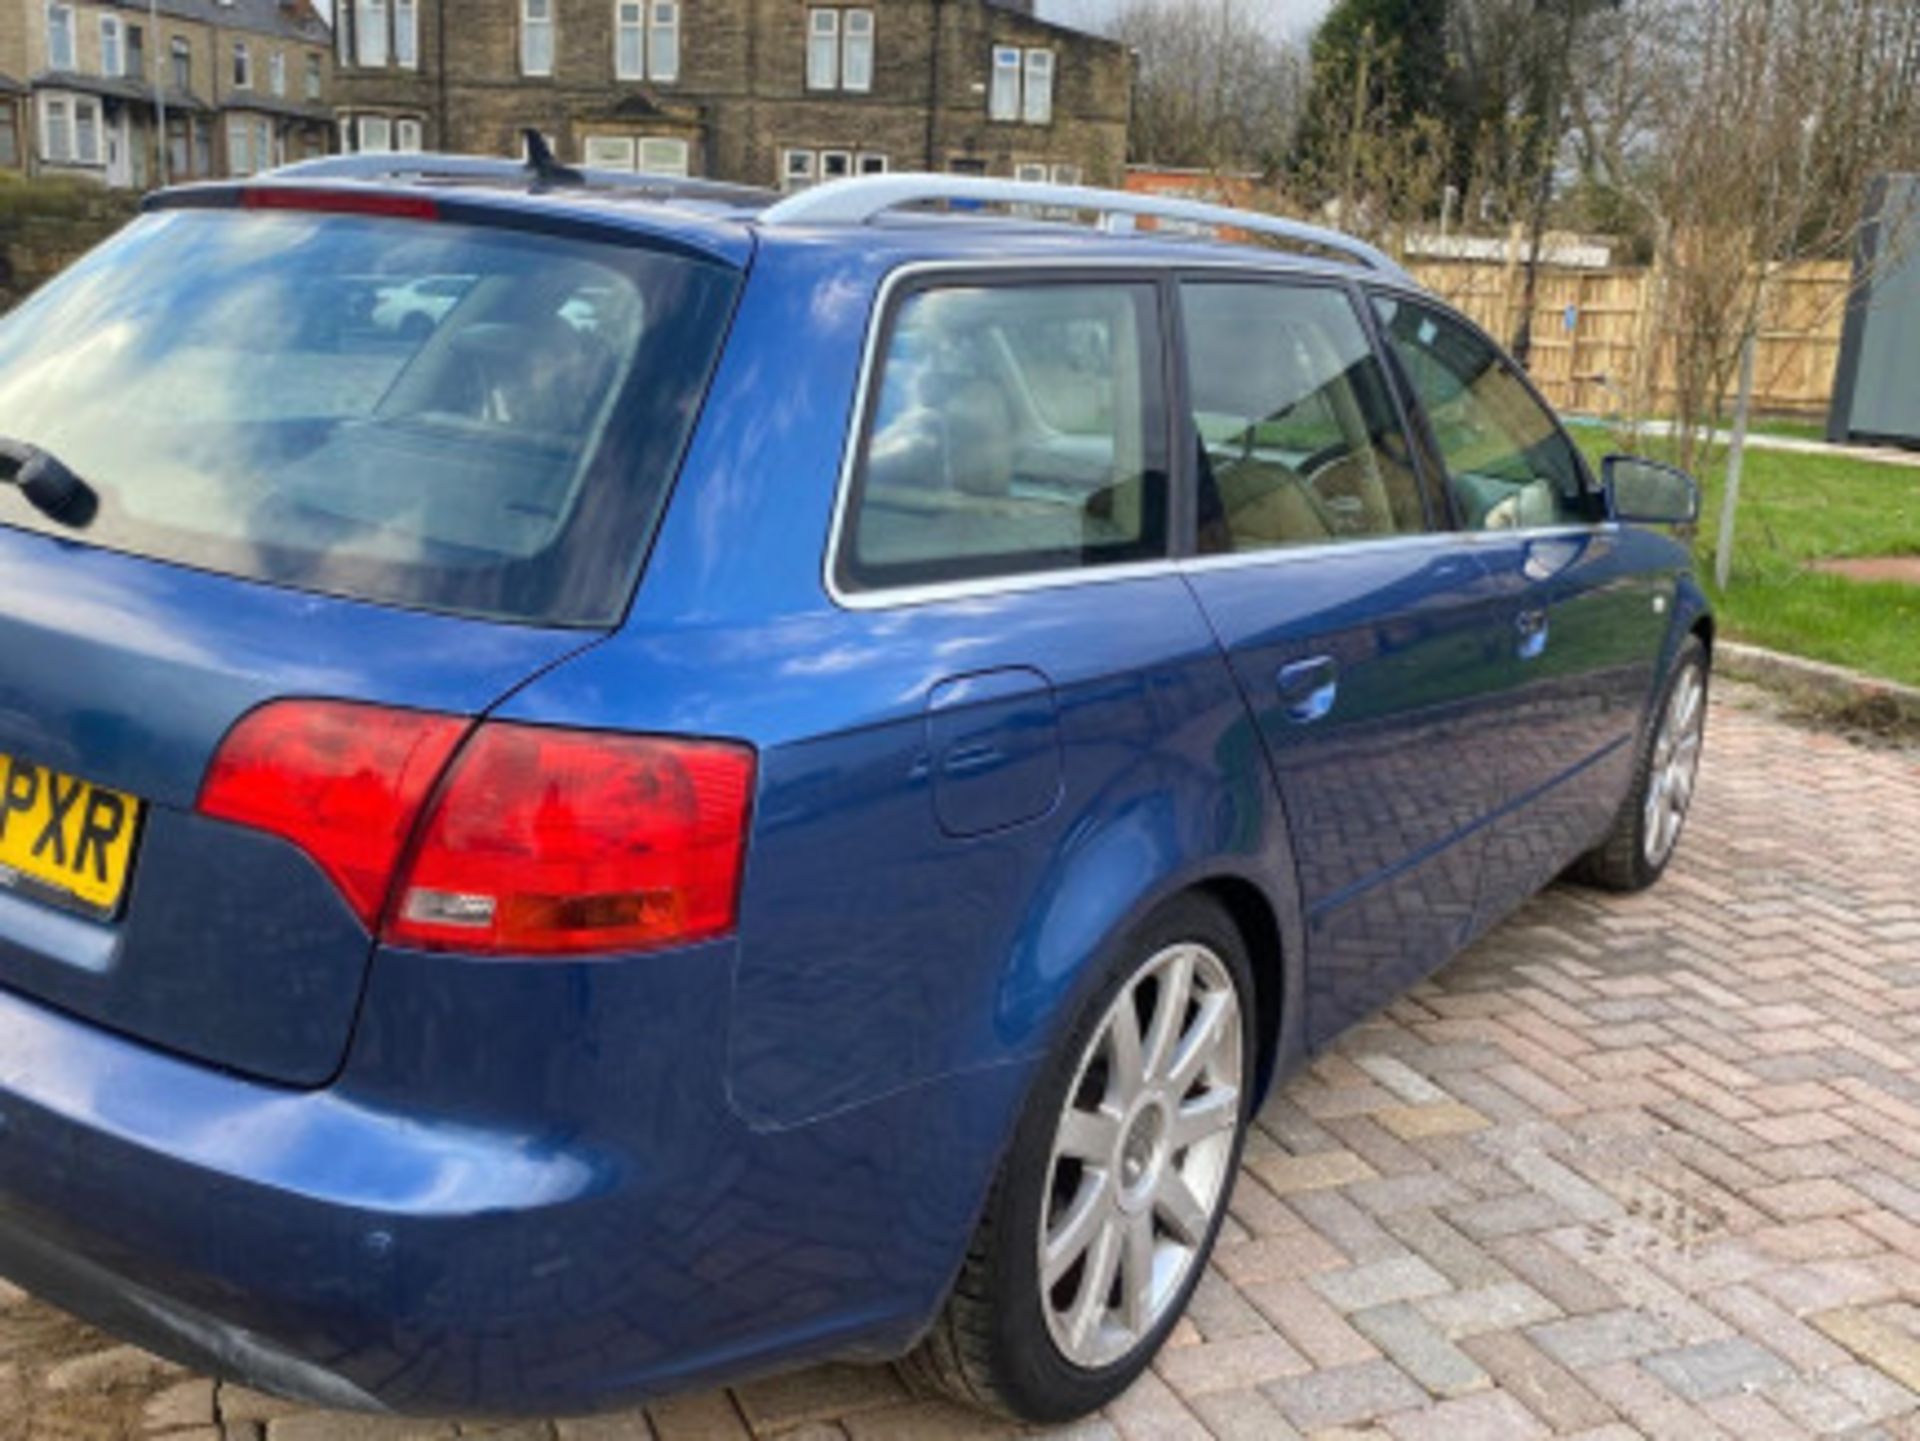 AUDI A4 AVANT 1.9 TDI SE 5DR ESTATE - RARE AND RELIABLE LUXURY WAGON >>--NO VAT ON HAMMER--<< - Image 22 of 97